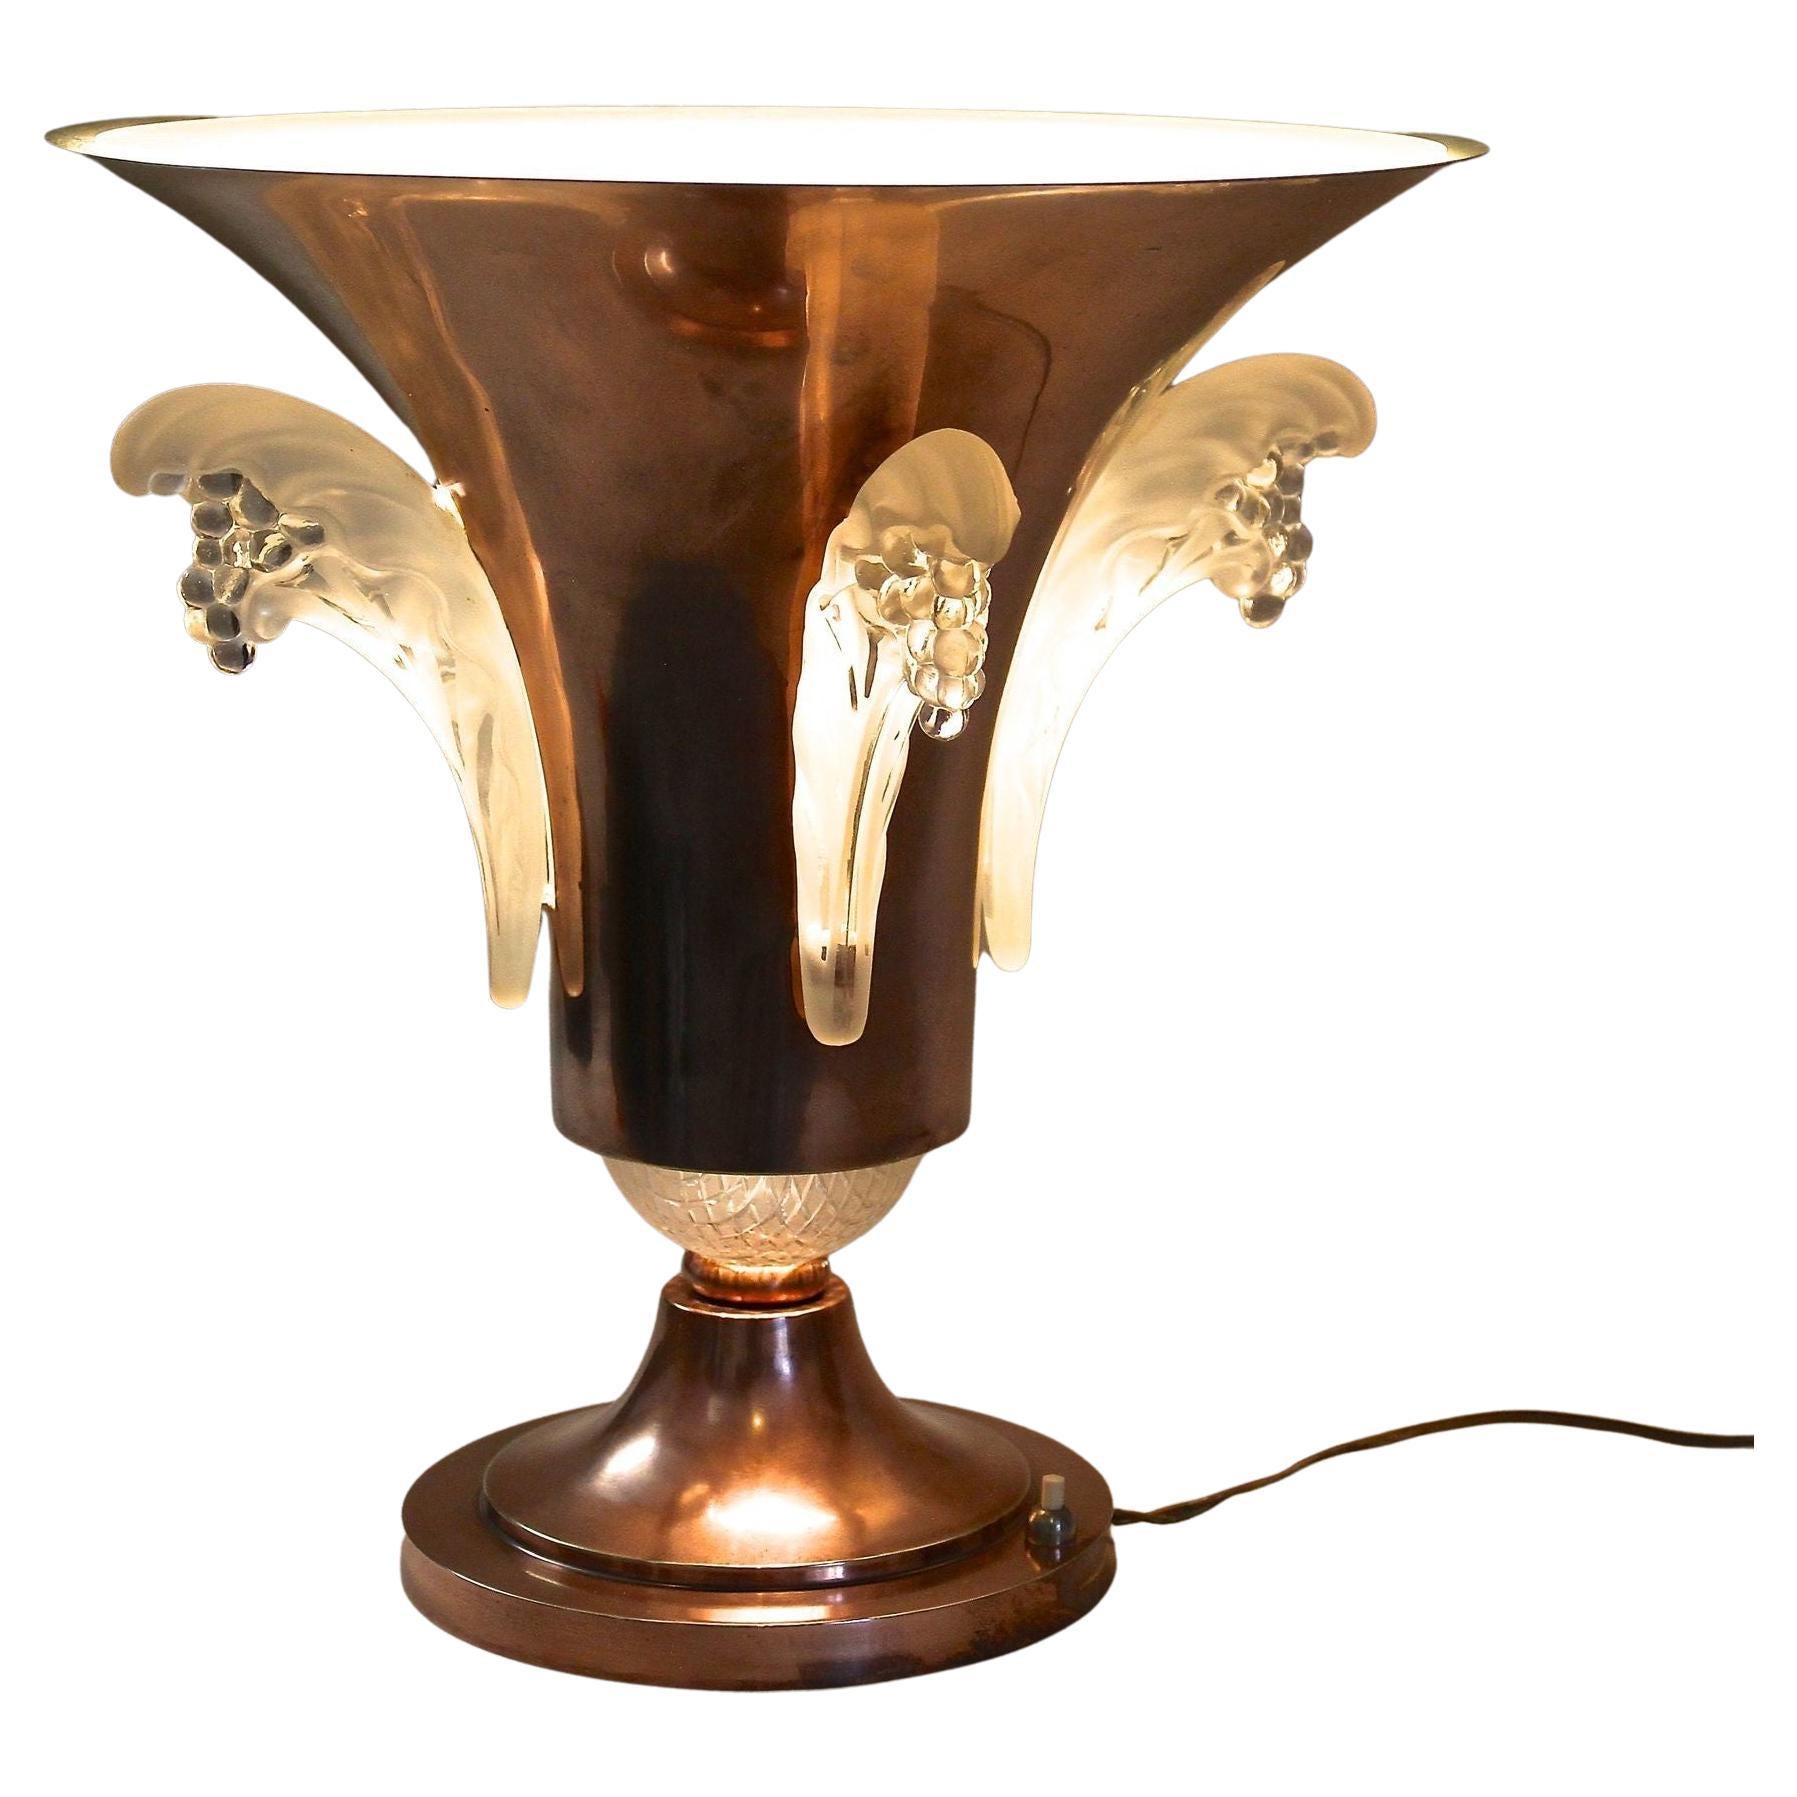 Art Deco Copper Table Lamp with Lalique Glass Elements, France, circa 1925